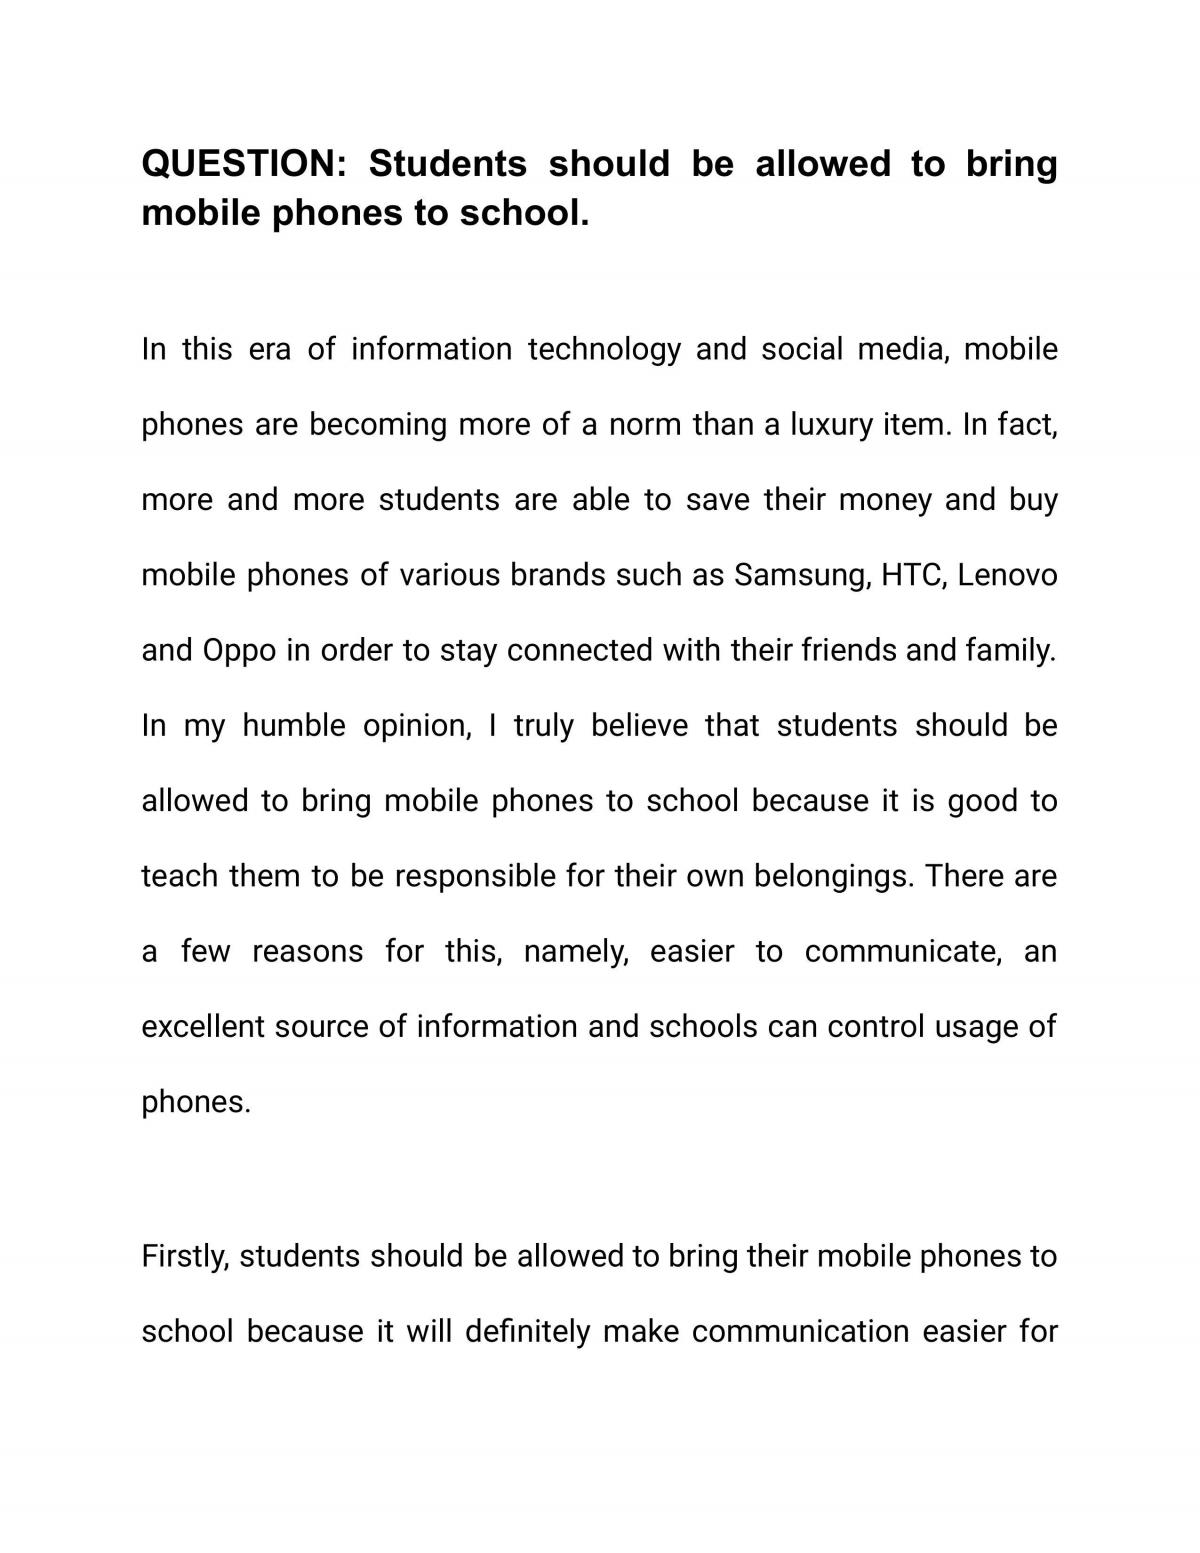 essay about cell phone should be allowed at school